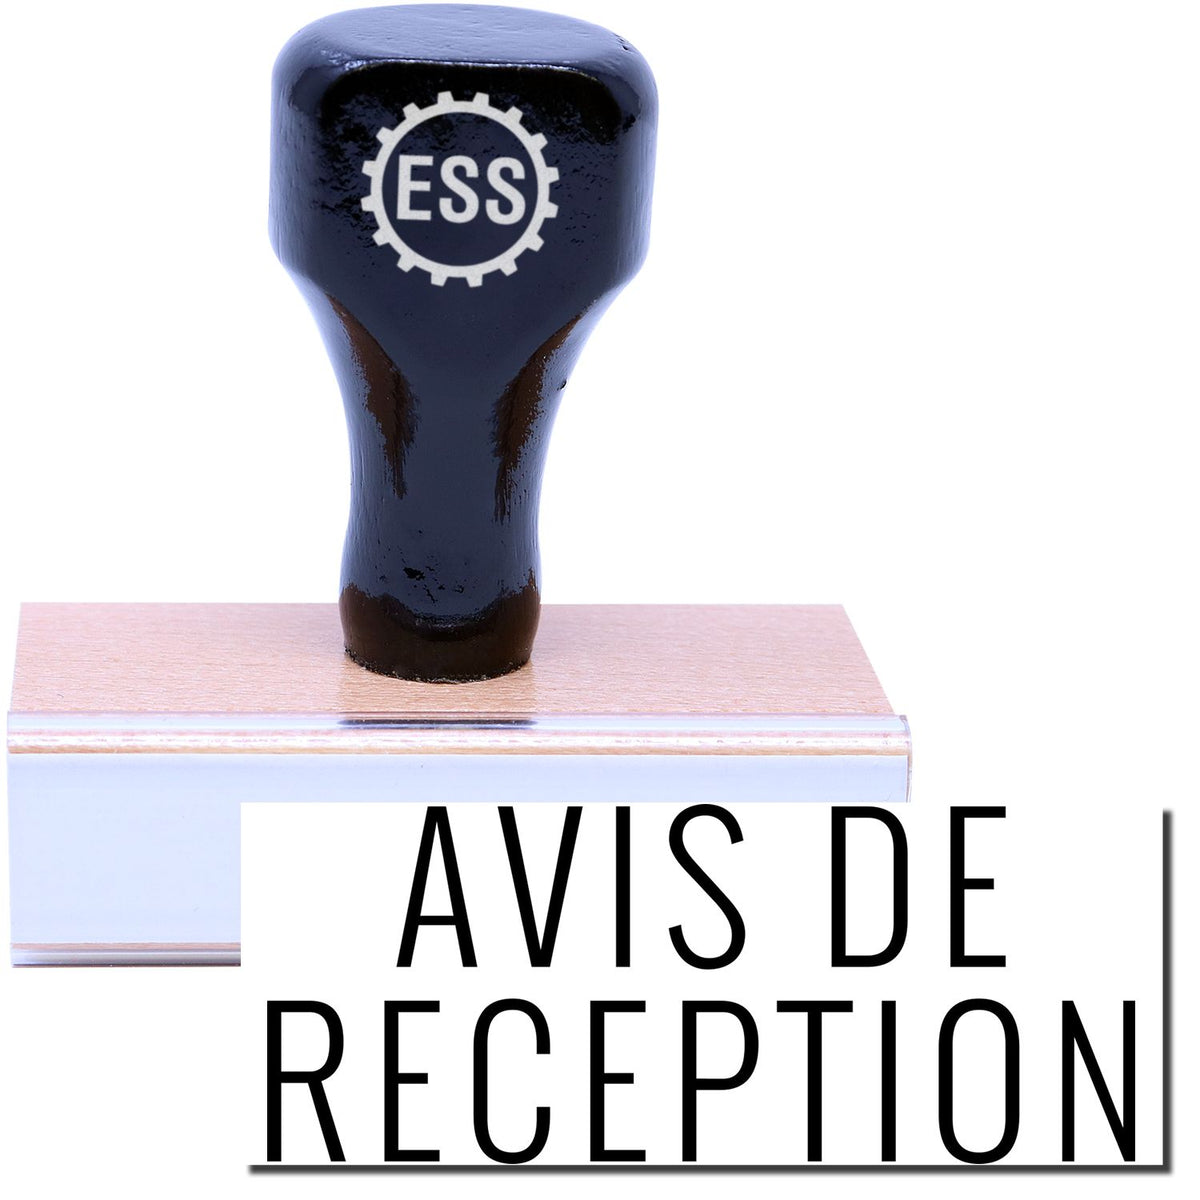 A stock office rubber stamp with a stamped image showing how the text &quot;AVIS DE RECEPTION&quot; is displayed after stamping.